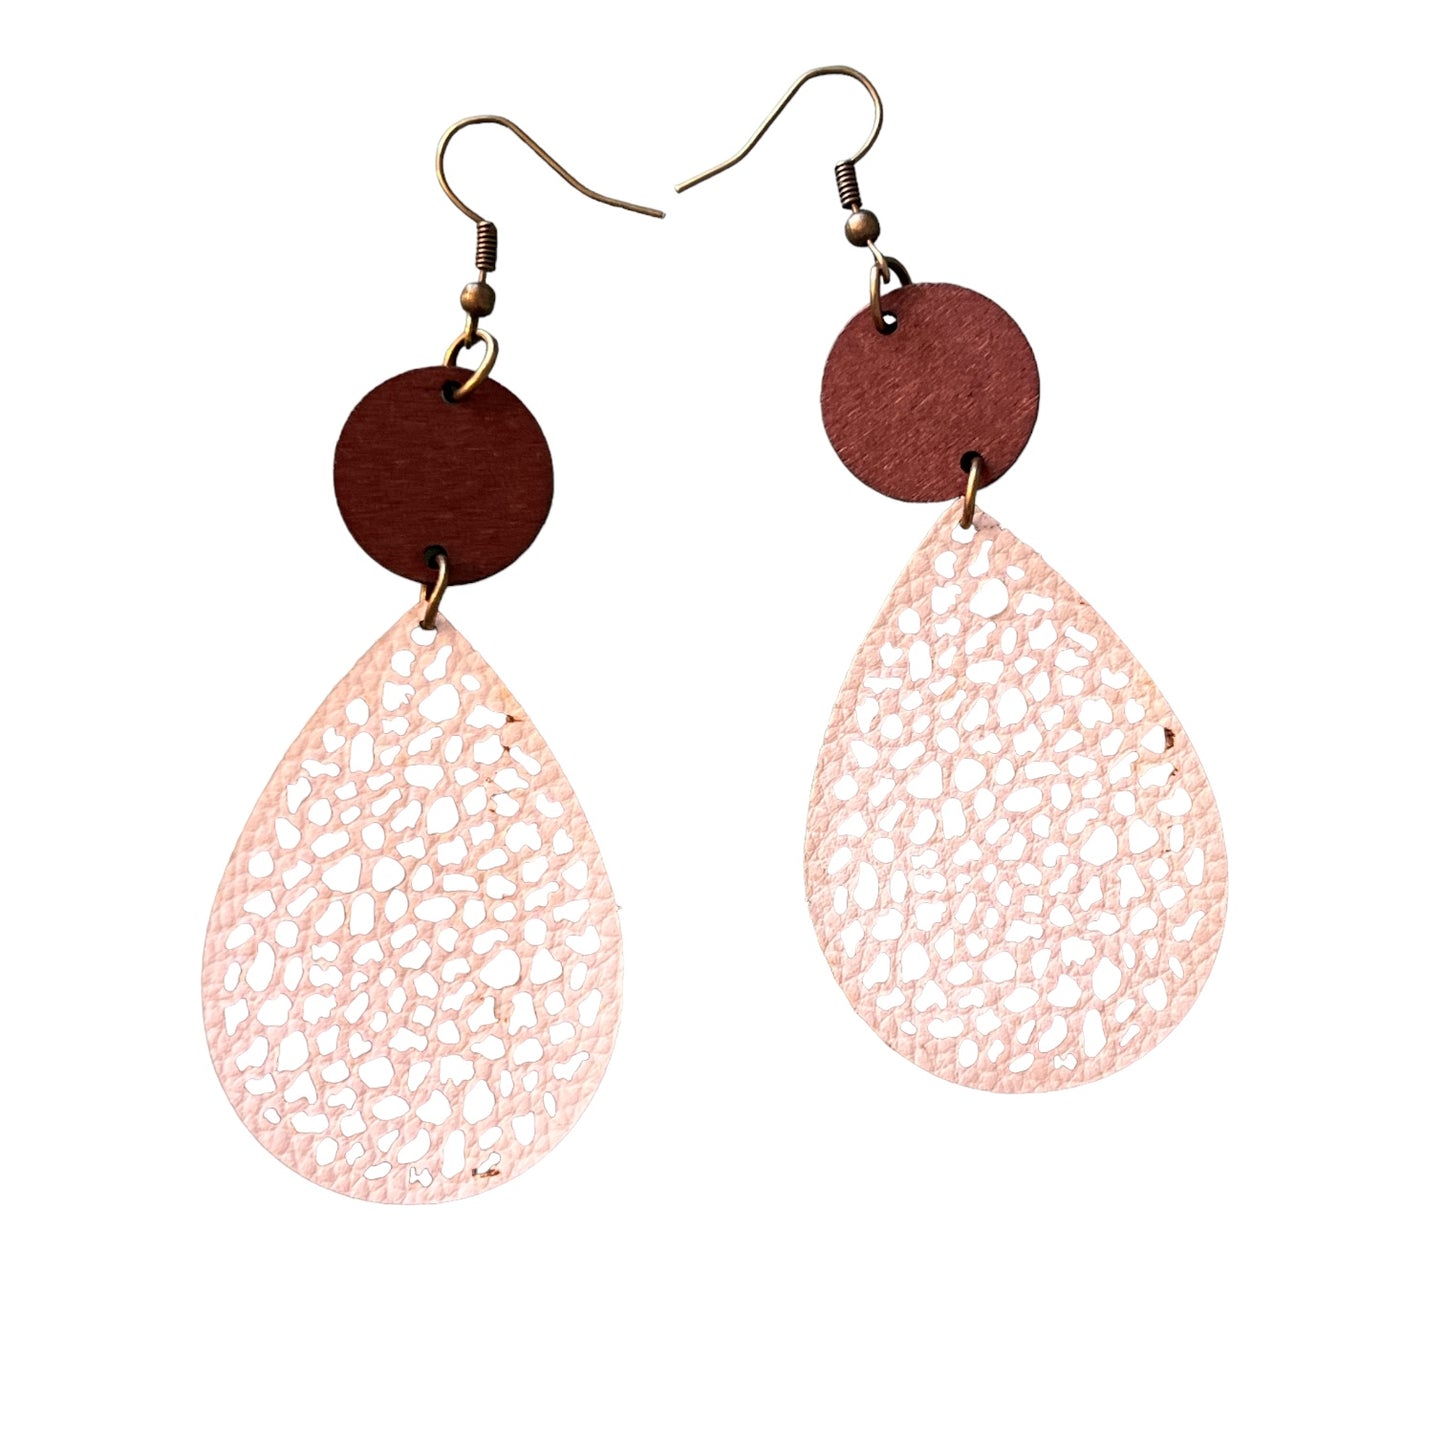 Natural Wood & Off-White Leather Earrings: Chic & Rustic Accessories